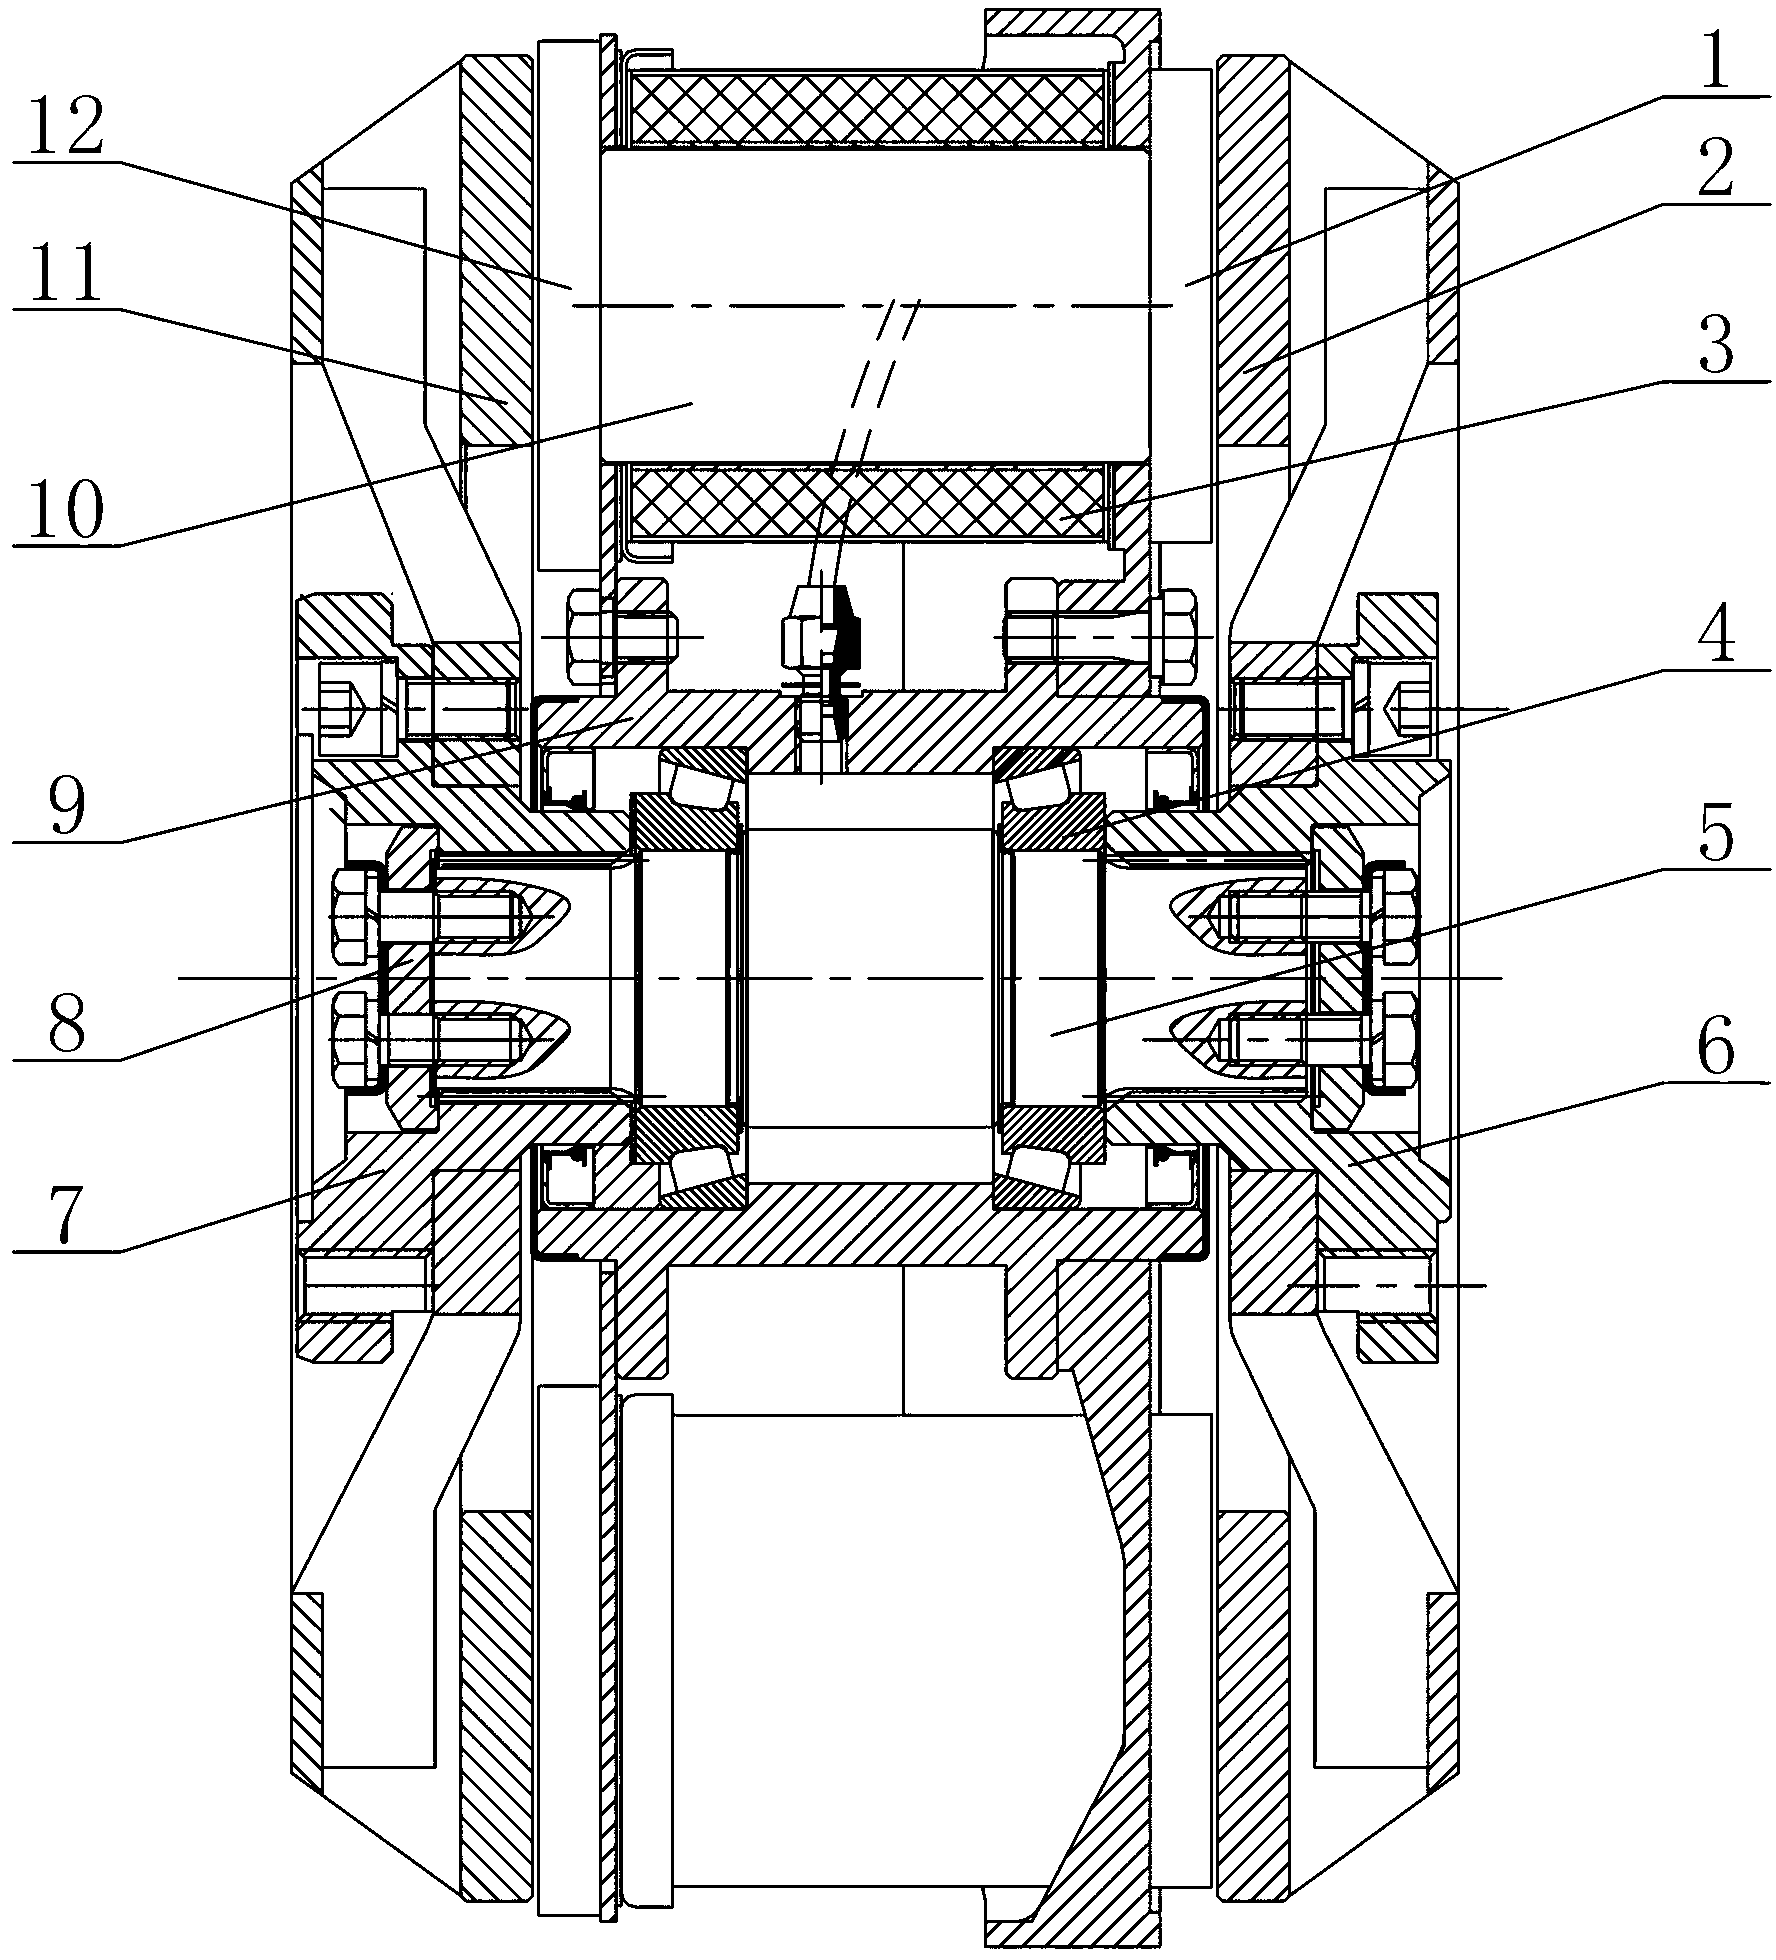 Centrally-mounted eddy current retarder